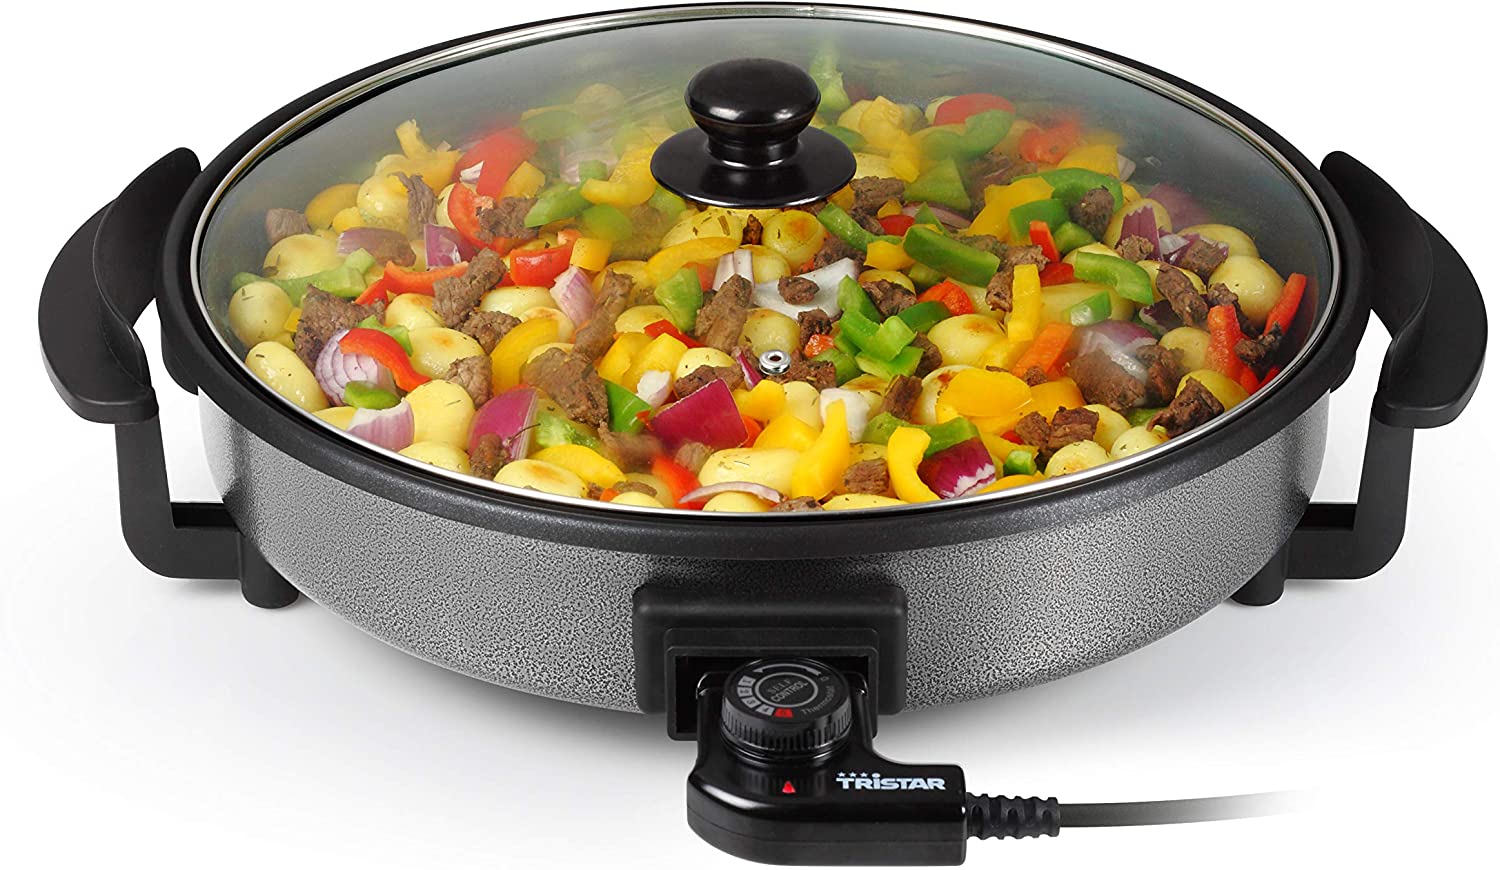 Tristar Multifunction Party Grill Pan - Electric Multi Cooker - 40cm